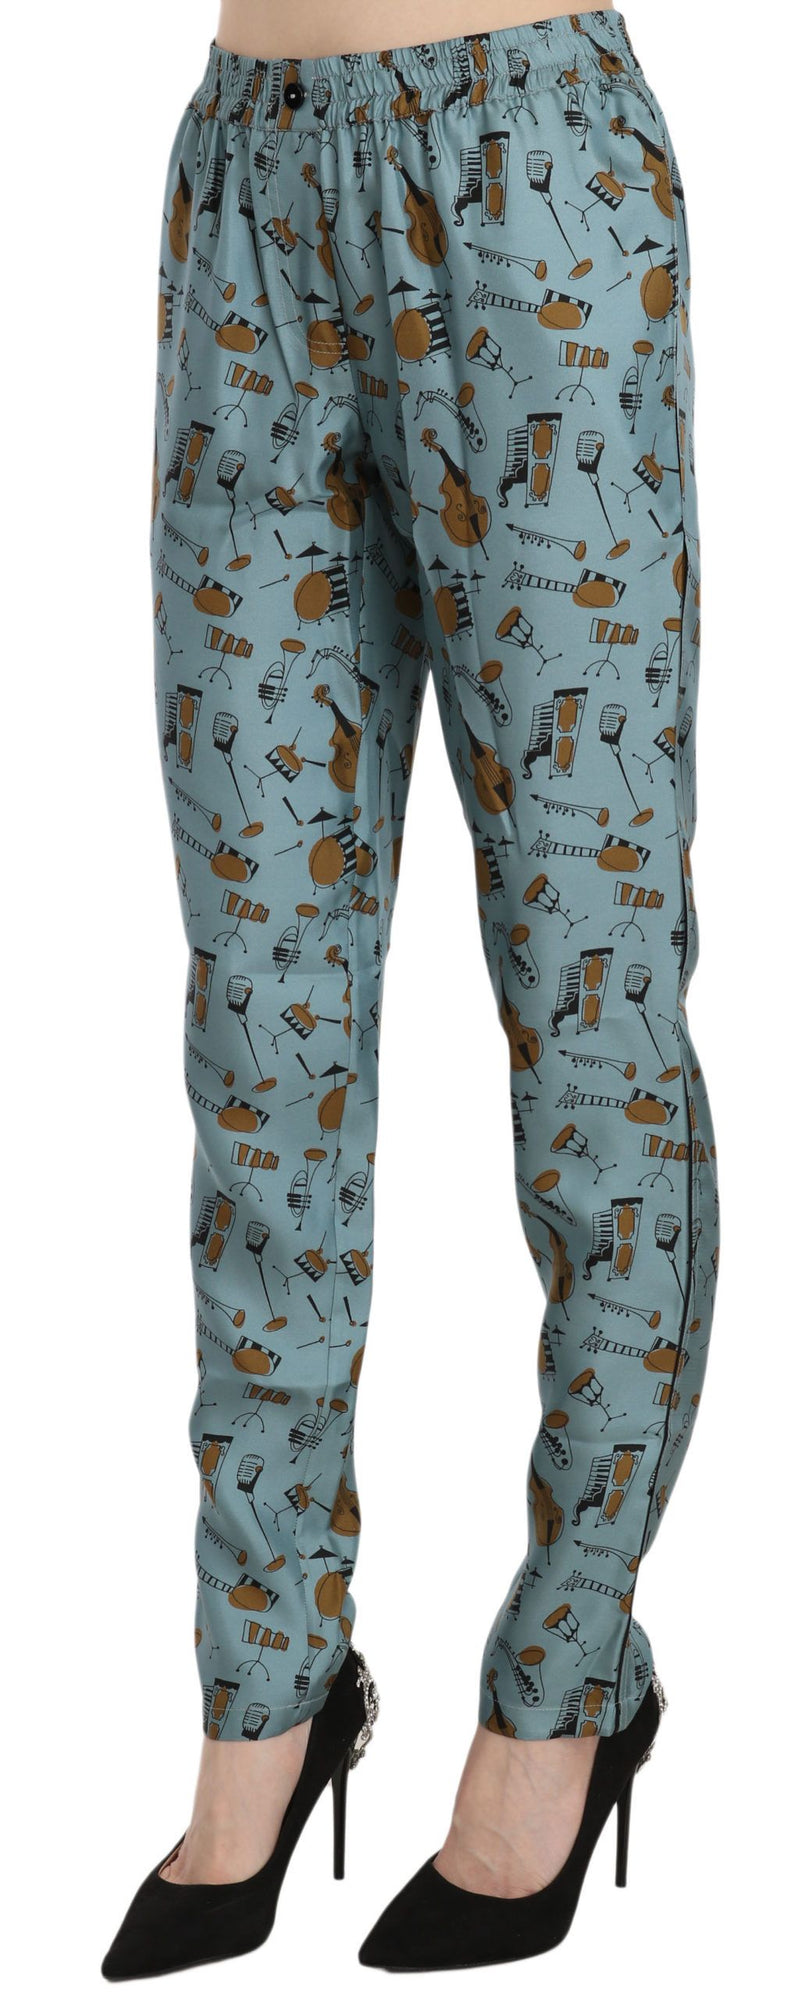 Dolce & Gabbana Blue Musical Instruments Print Tapered Women's Pants